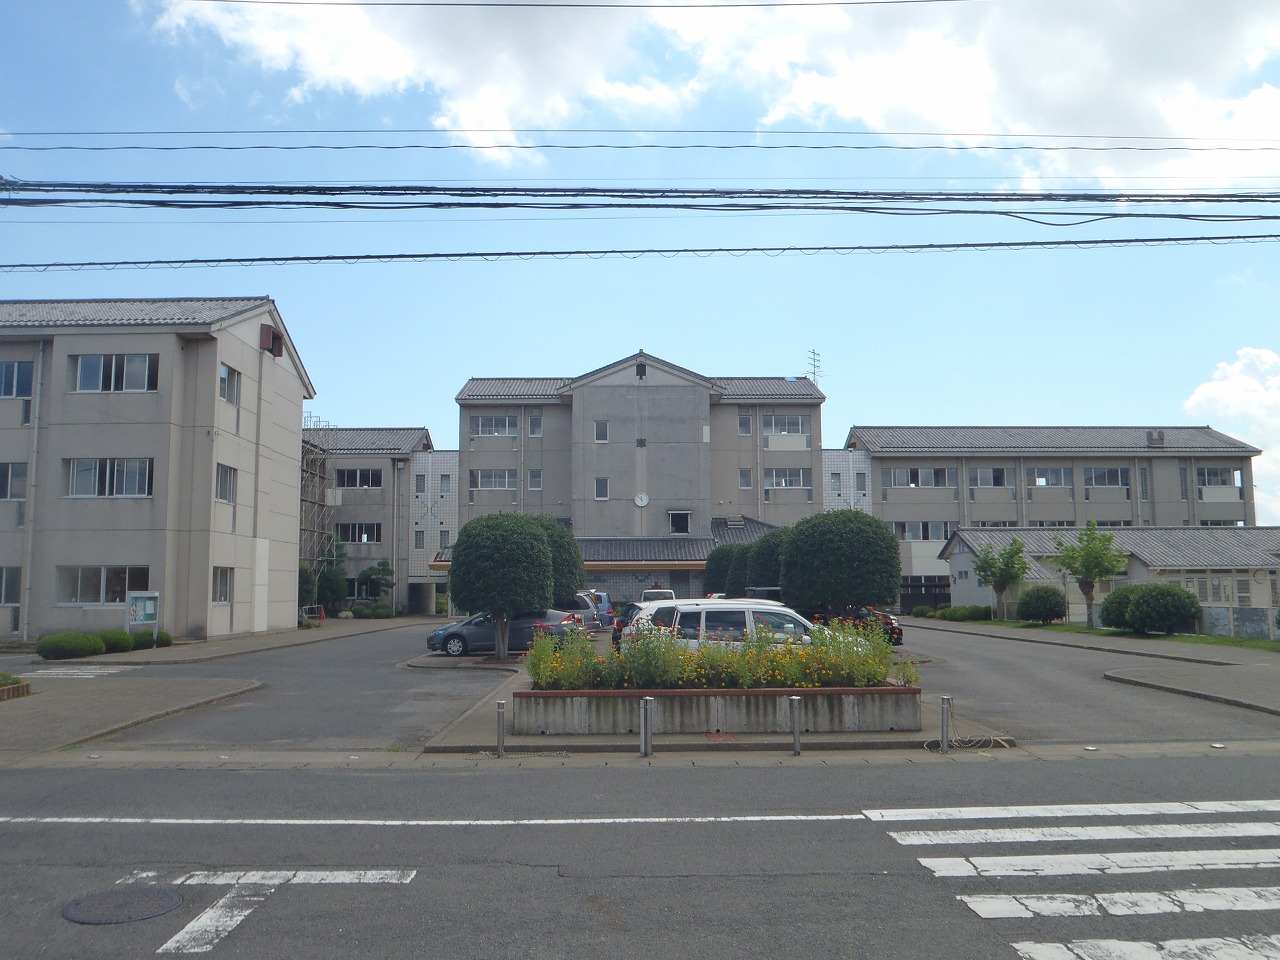 Primary school. Hitachinaka 480m to stand outfield elementary school (elementary school)